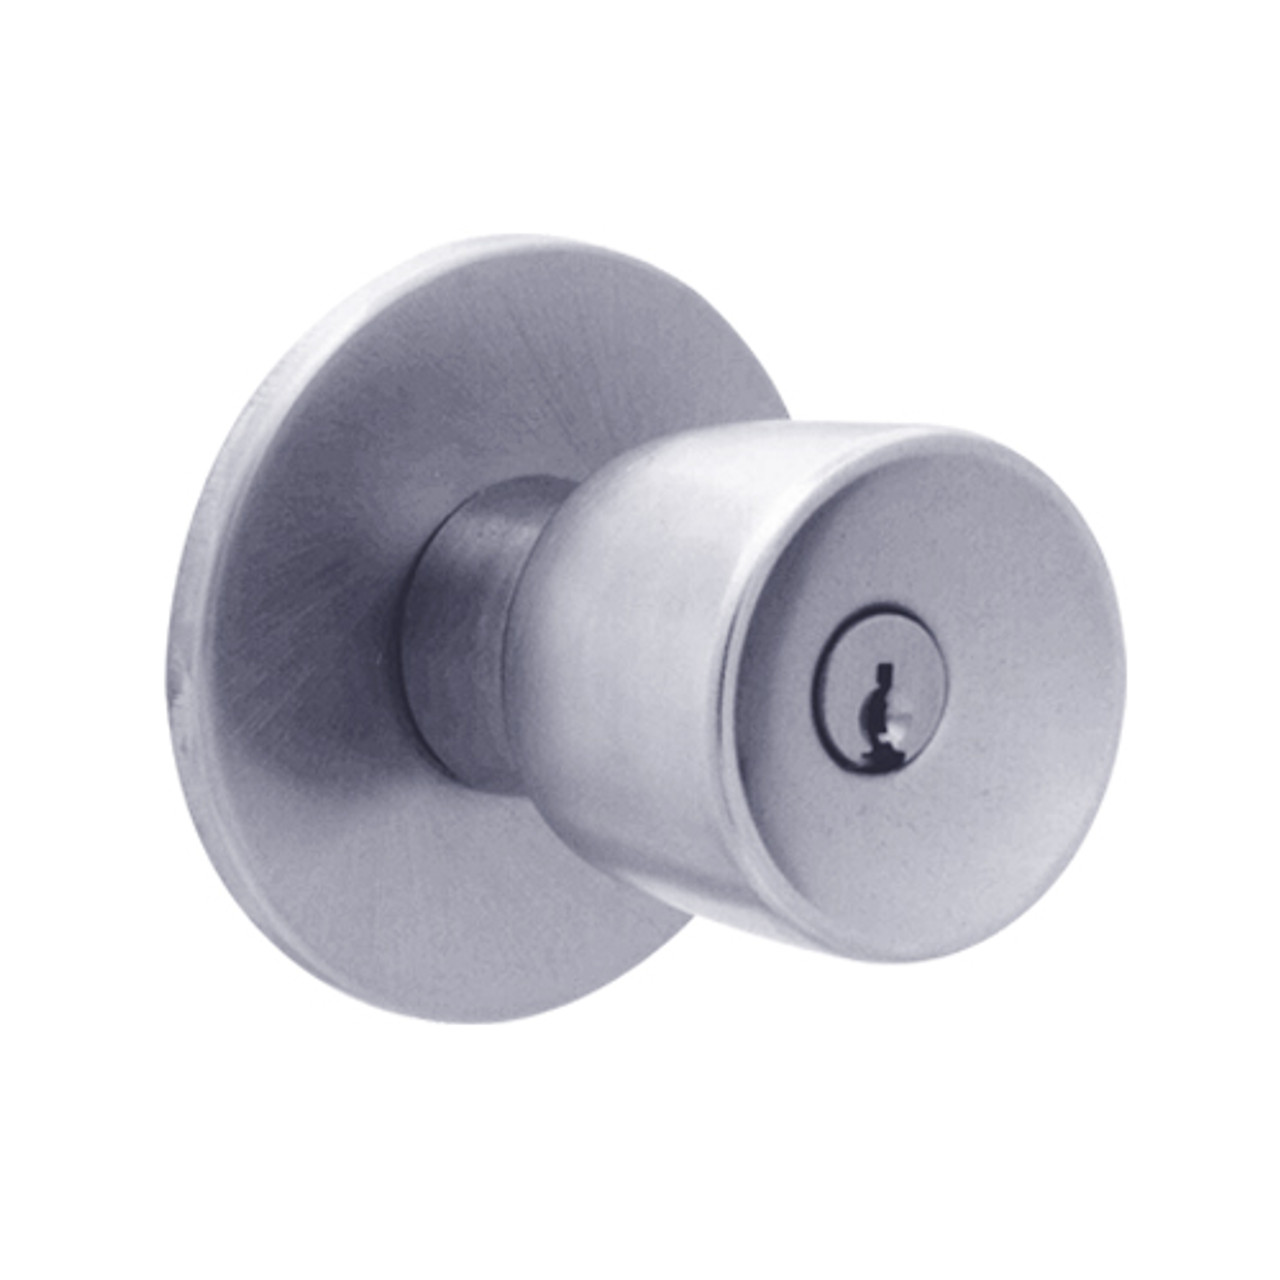 X561PD-EY-625 Falcon X Series Cylindrical Classroom Lock with Elite-York Knob Style in Bright Chrome Finish